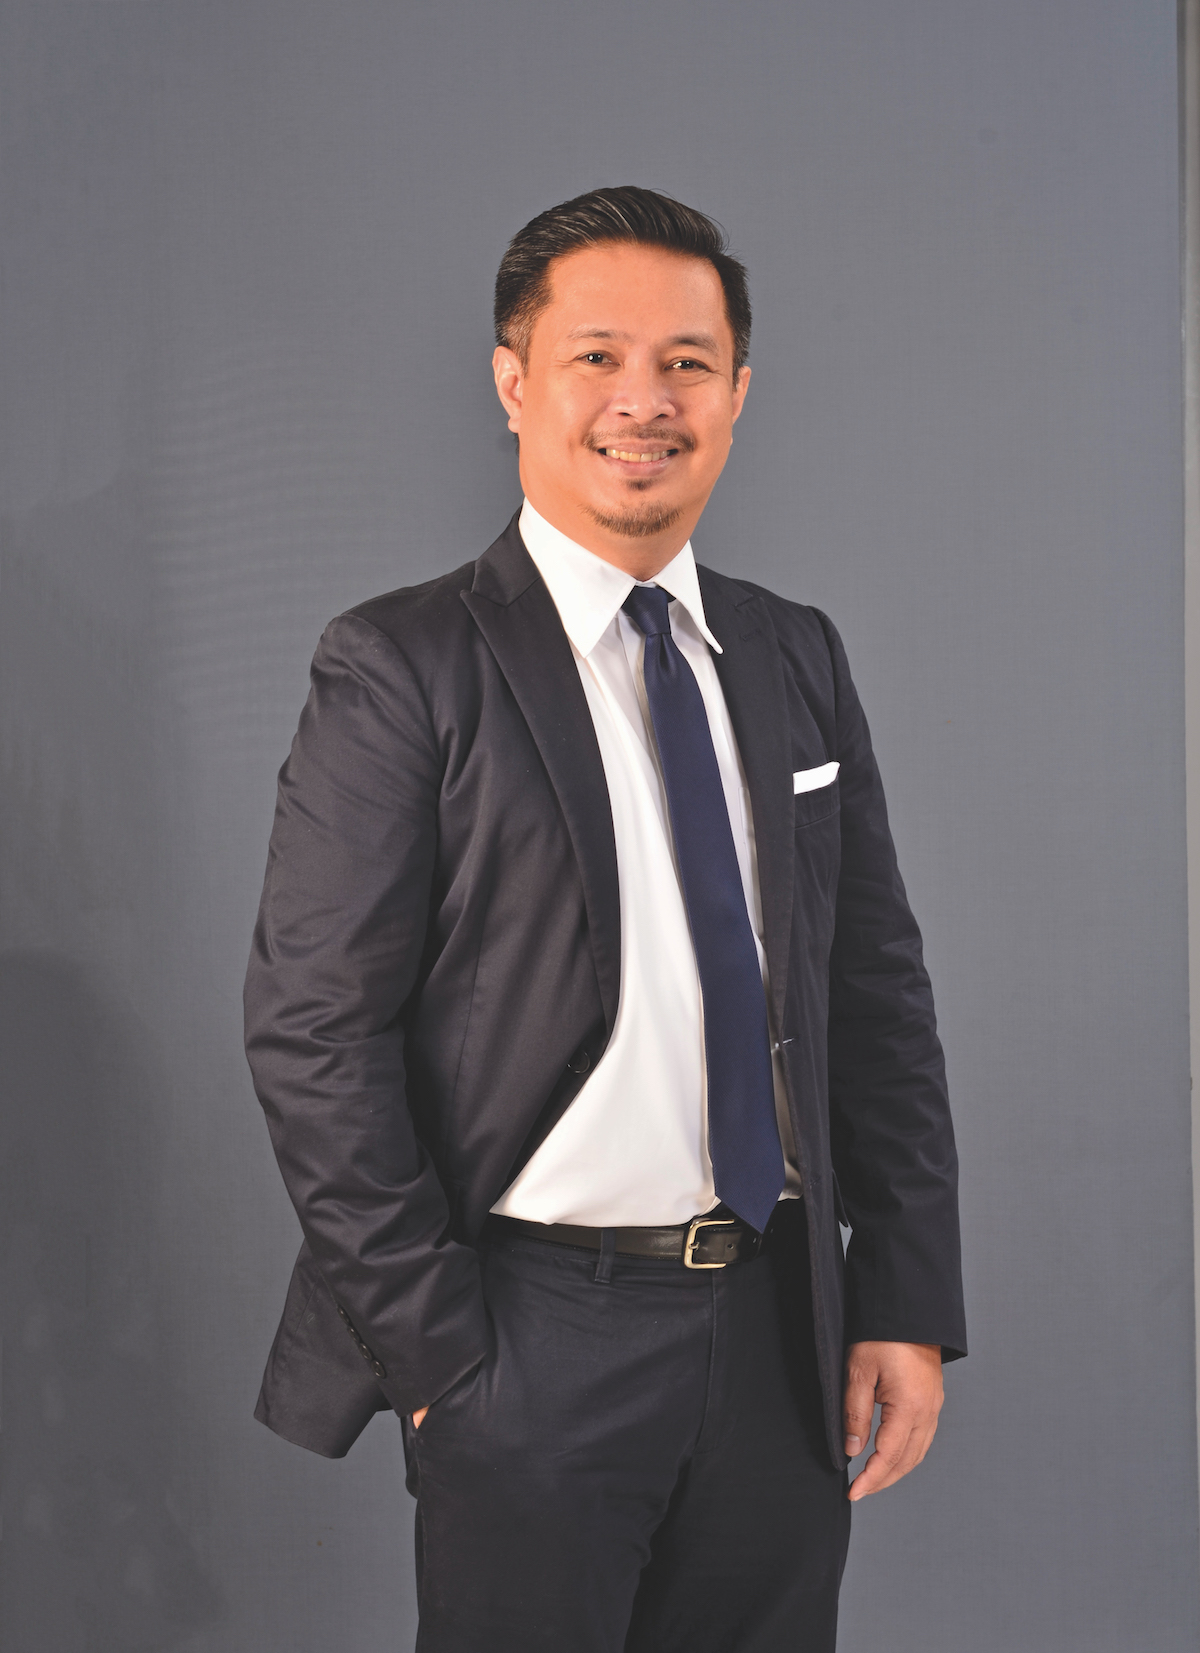 Jay Daniel, Santiago General Manager of Philippine Ports Authority